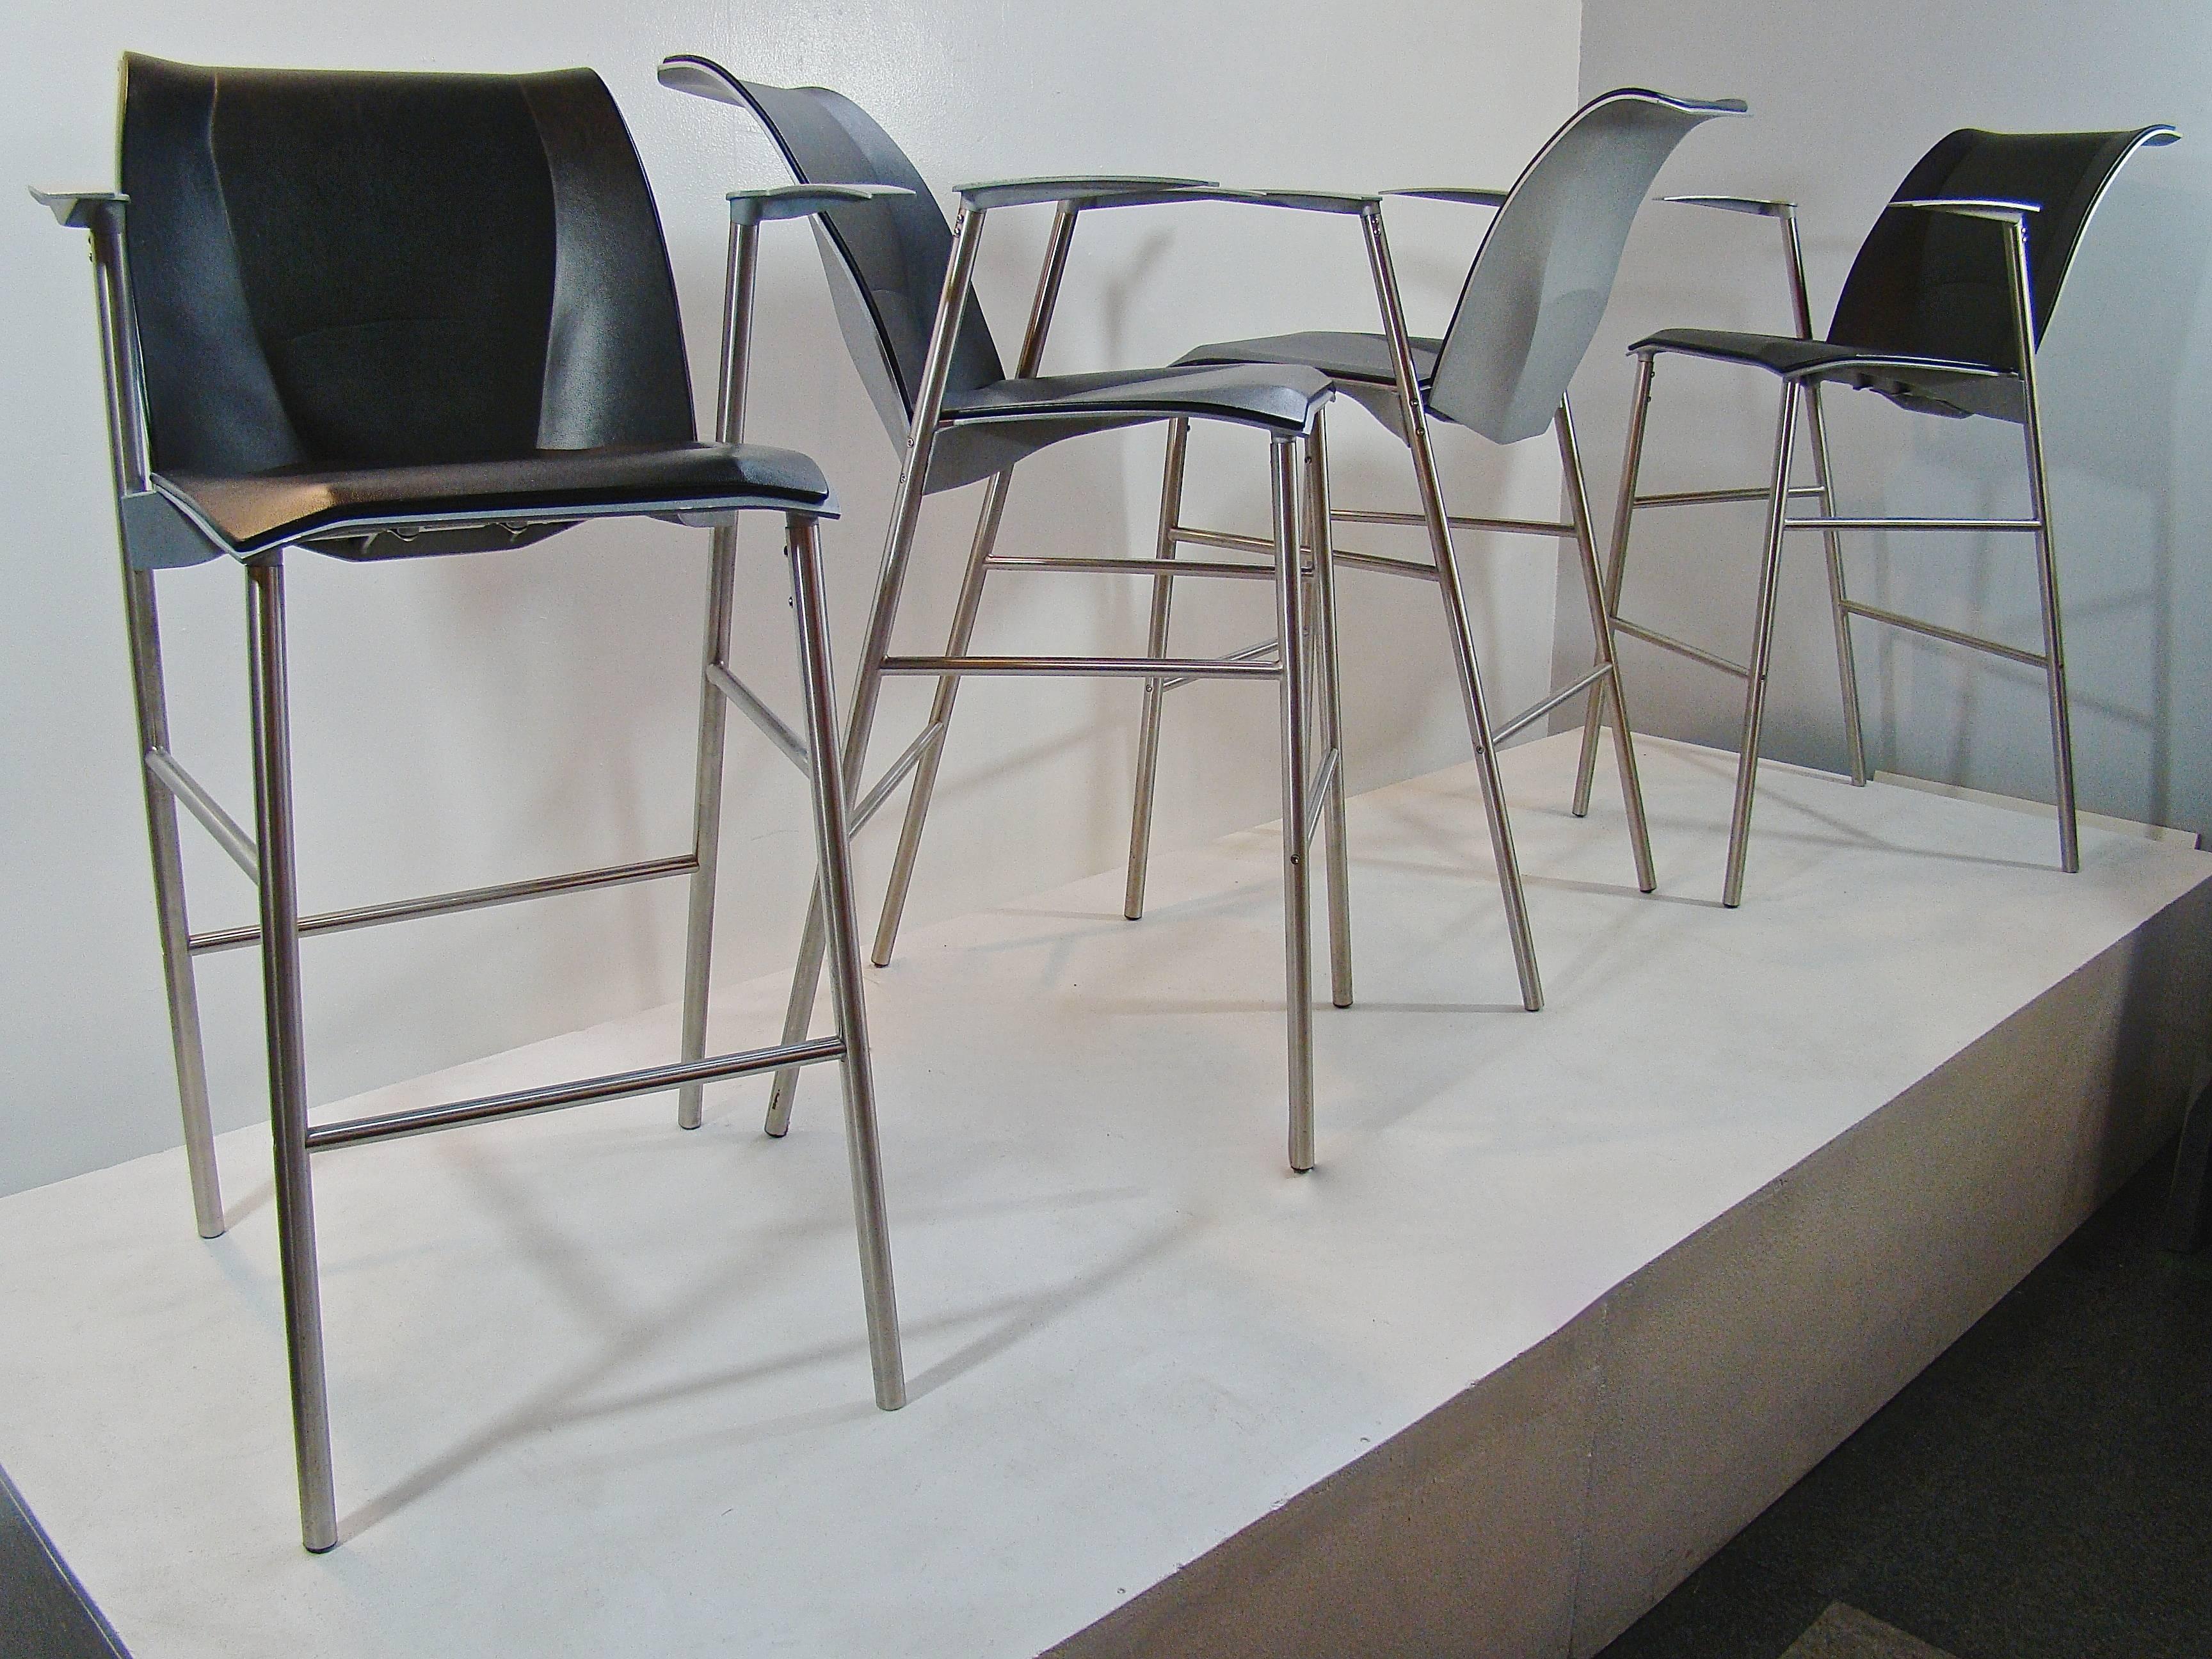 Extremely rare Frank Gehry Fog bar stools produced by Knoll Studio in a very limited number in 1999. Comprised of high quality polished anodized cast aluminum, these bar stools are not only beautiful, but extremely comfortable as well as they